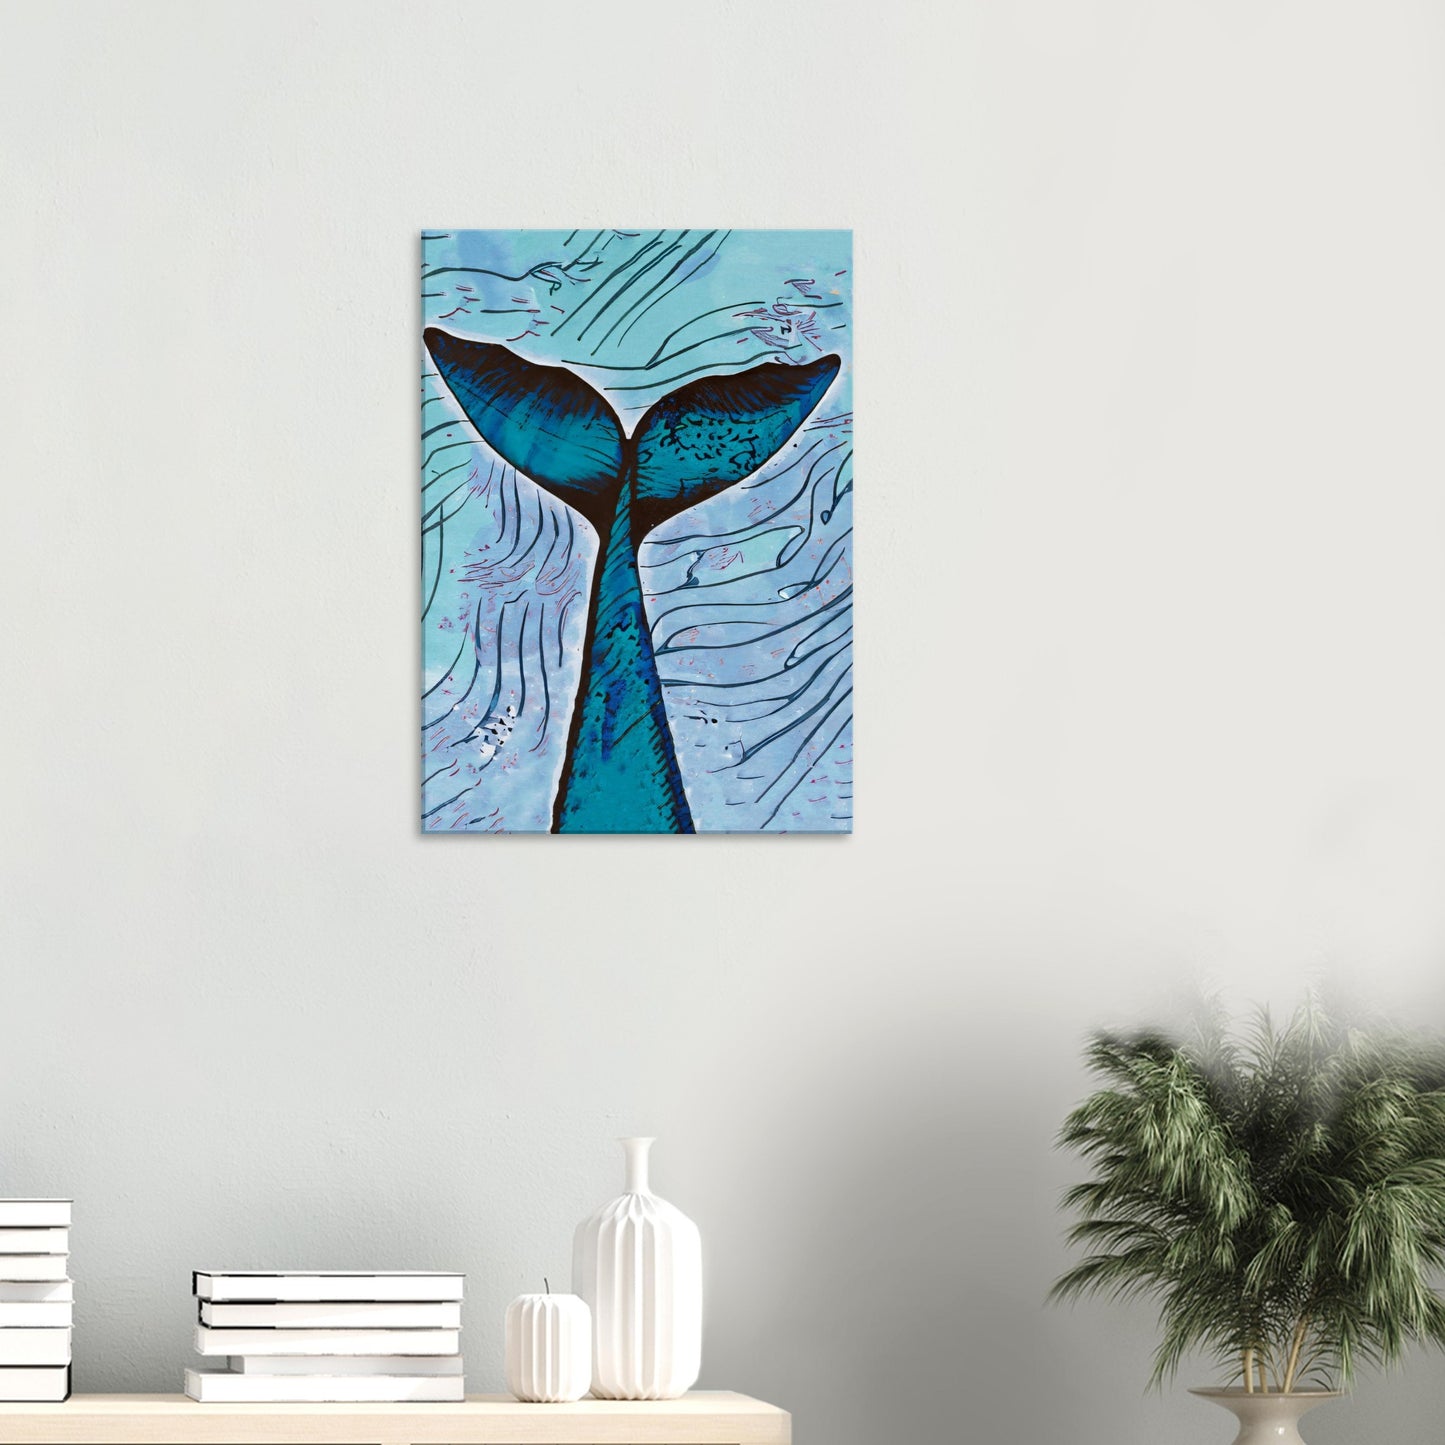 Whale fin on Canvas line drawing by Posterify Design